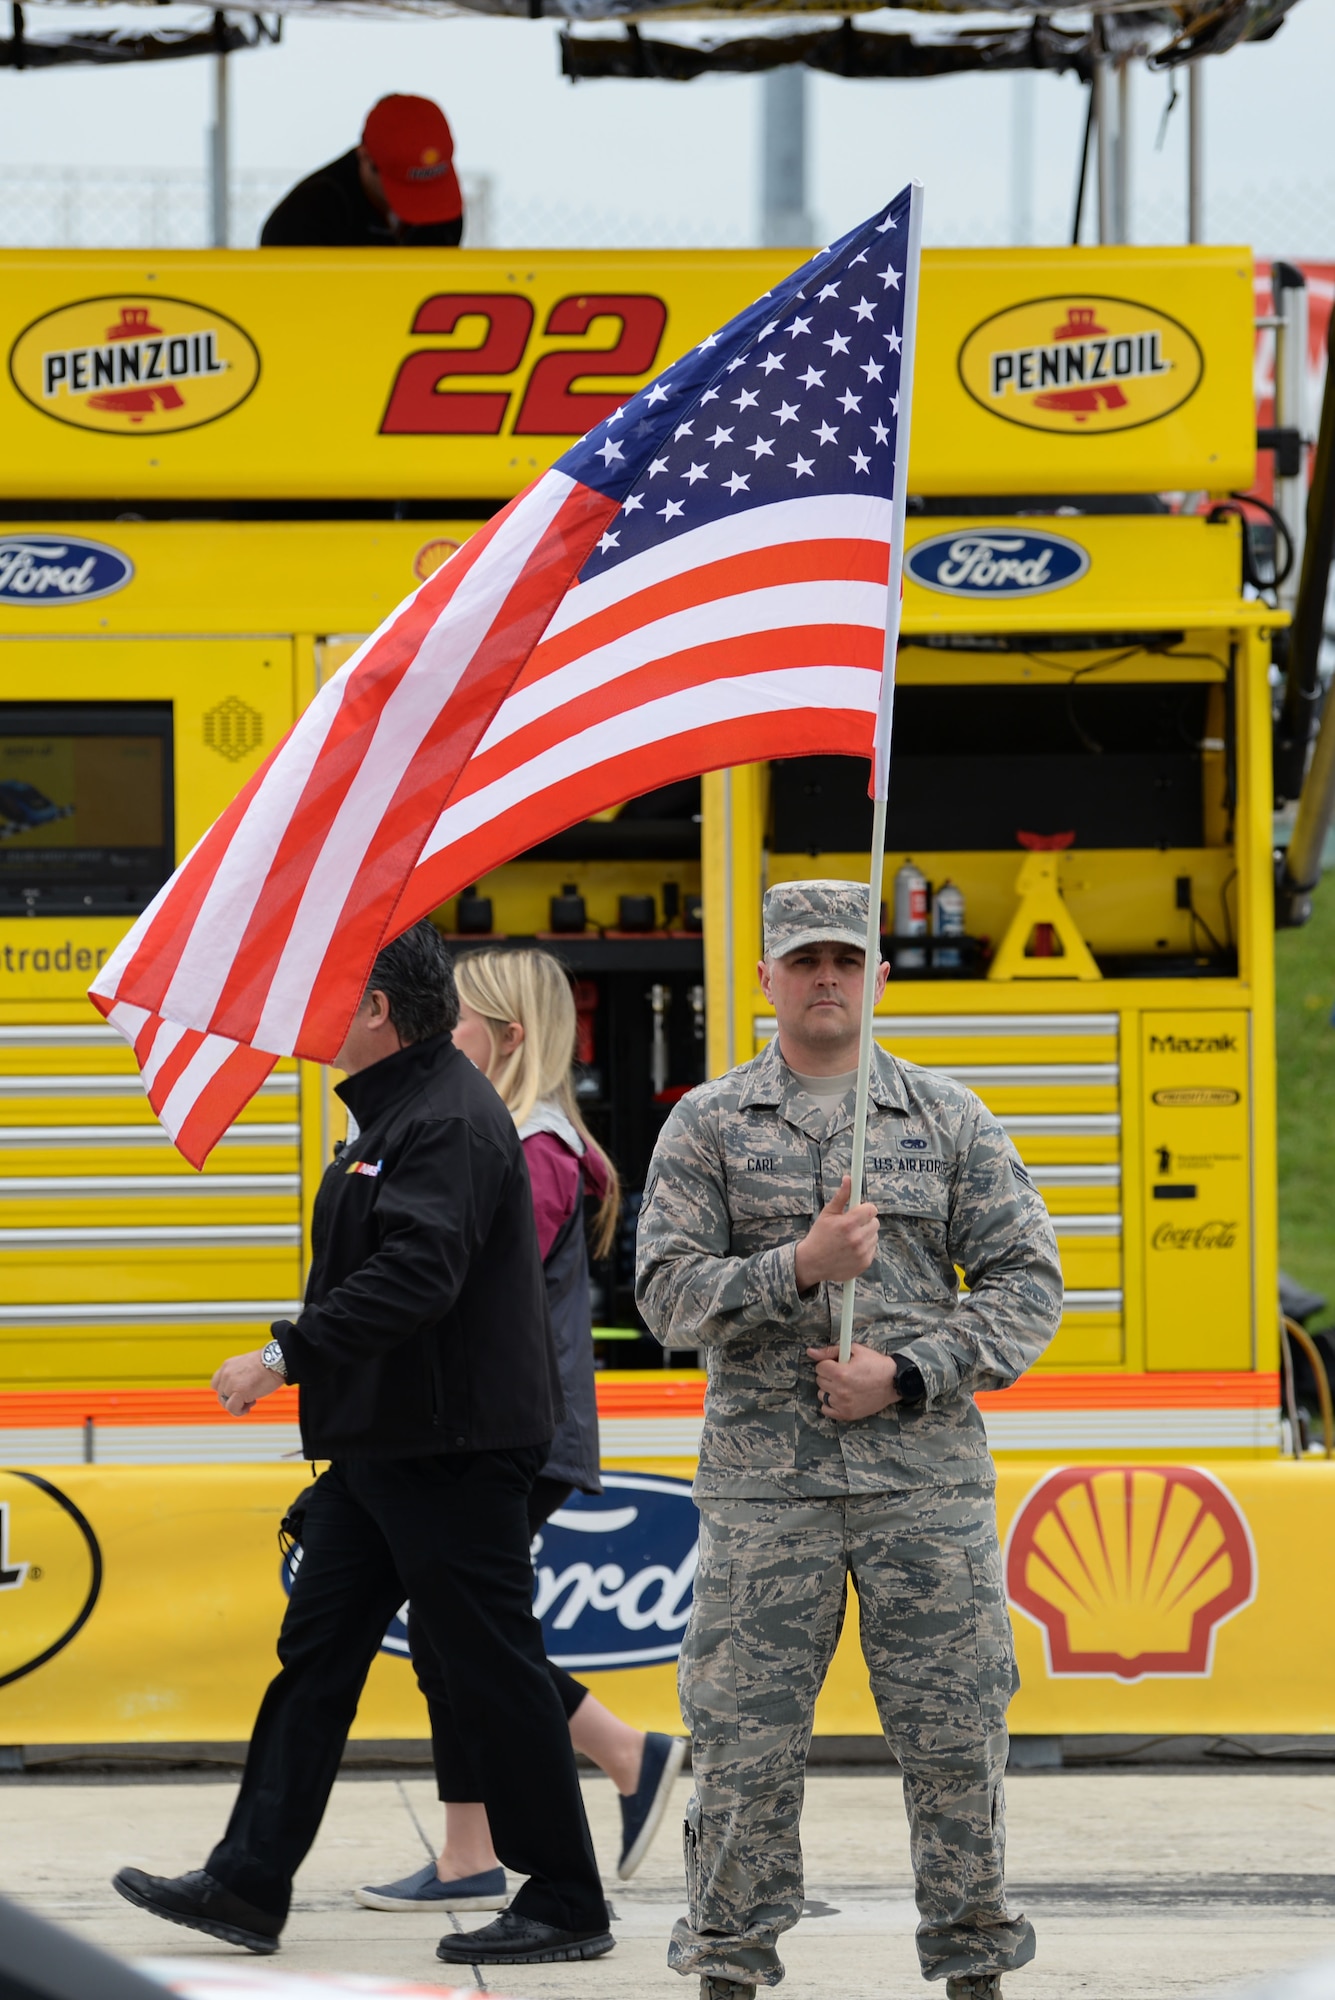 Airman 1st Class Michael Carl, 166th Maintenance Squadron non-destructive technician, New Castle National Guard Base, Del., holds an American Flag prior to the start of the “AAA 400 Drive for Autism” Monster Energy NASCAR Cup Series Race May 6, 2018, at the Dover International Speedway, Del. Carl and other Airmen participated in the race as volunteers and honorary pit crew members. (U.S. Air Force photo by Airman 1st Class Zoe M. Wockenfuss)